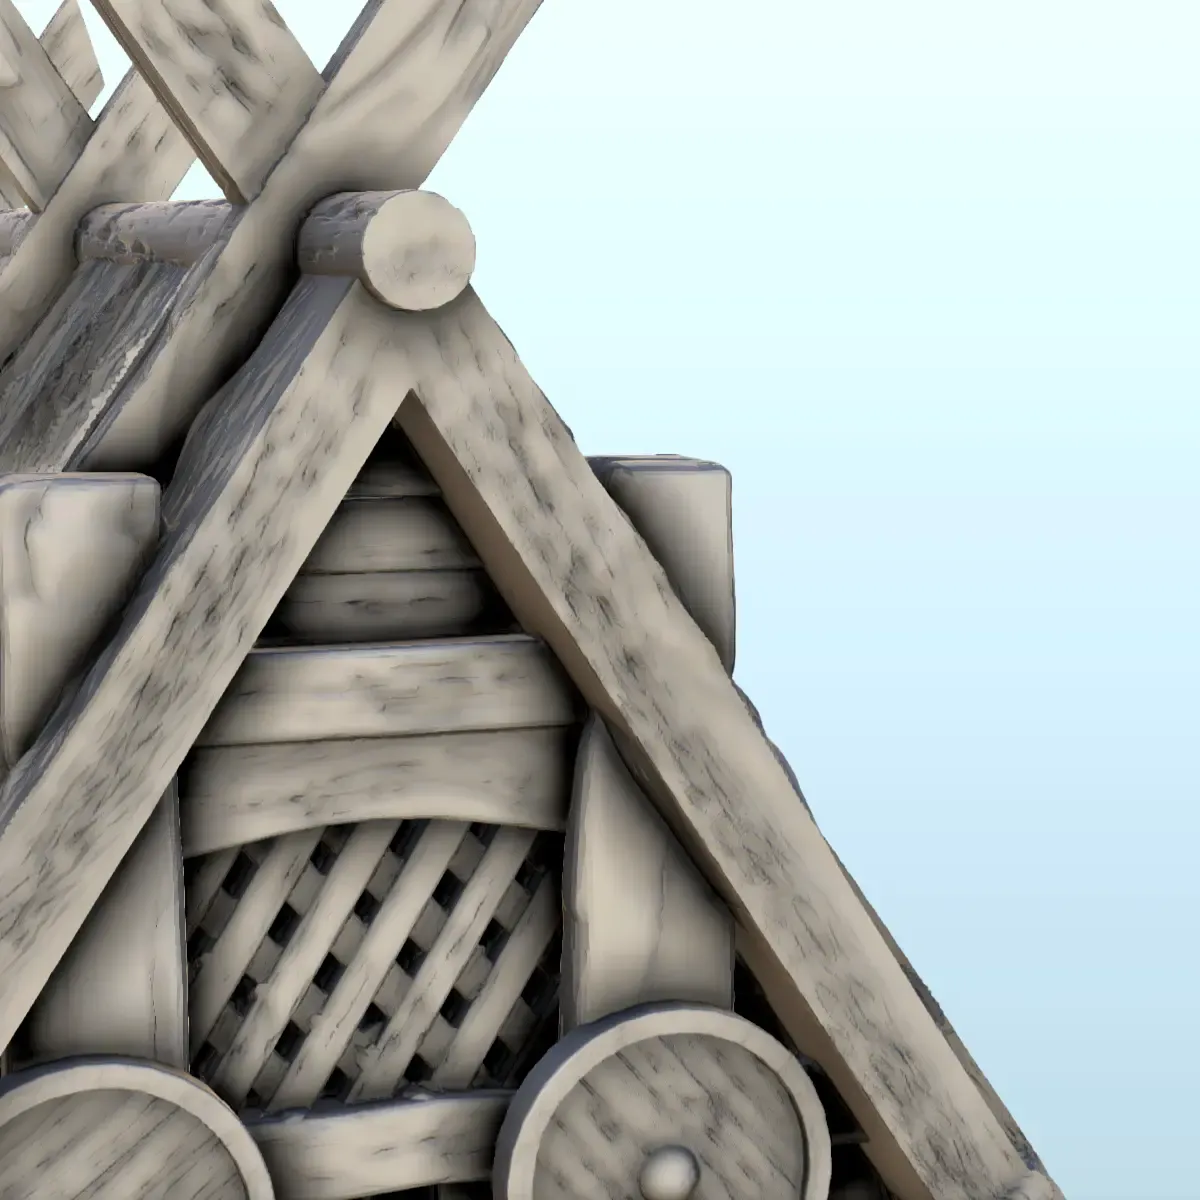 Viking building in thatch and wood with ornaments (7) - scen